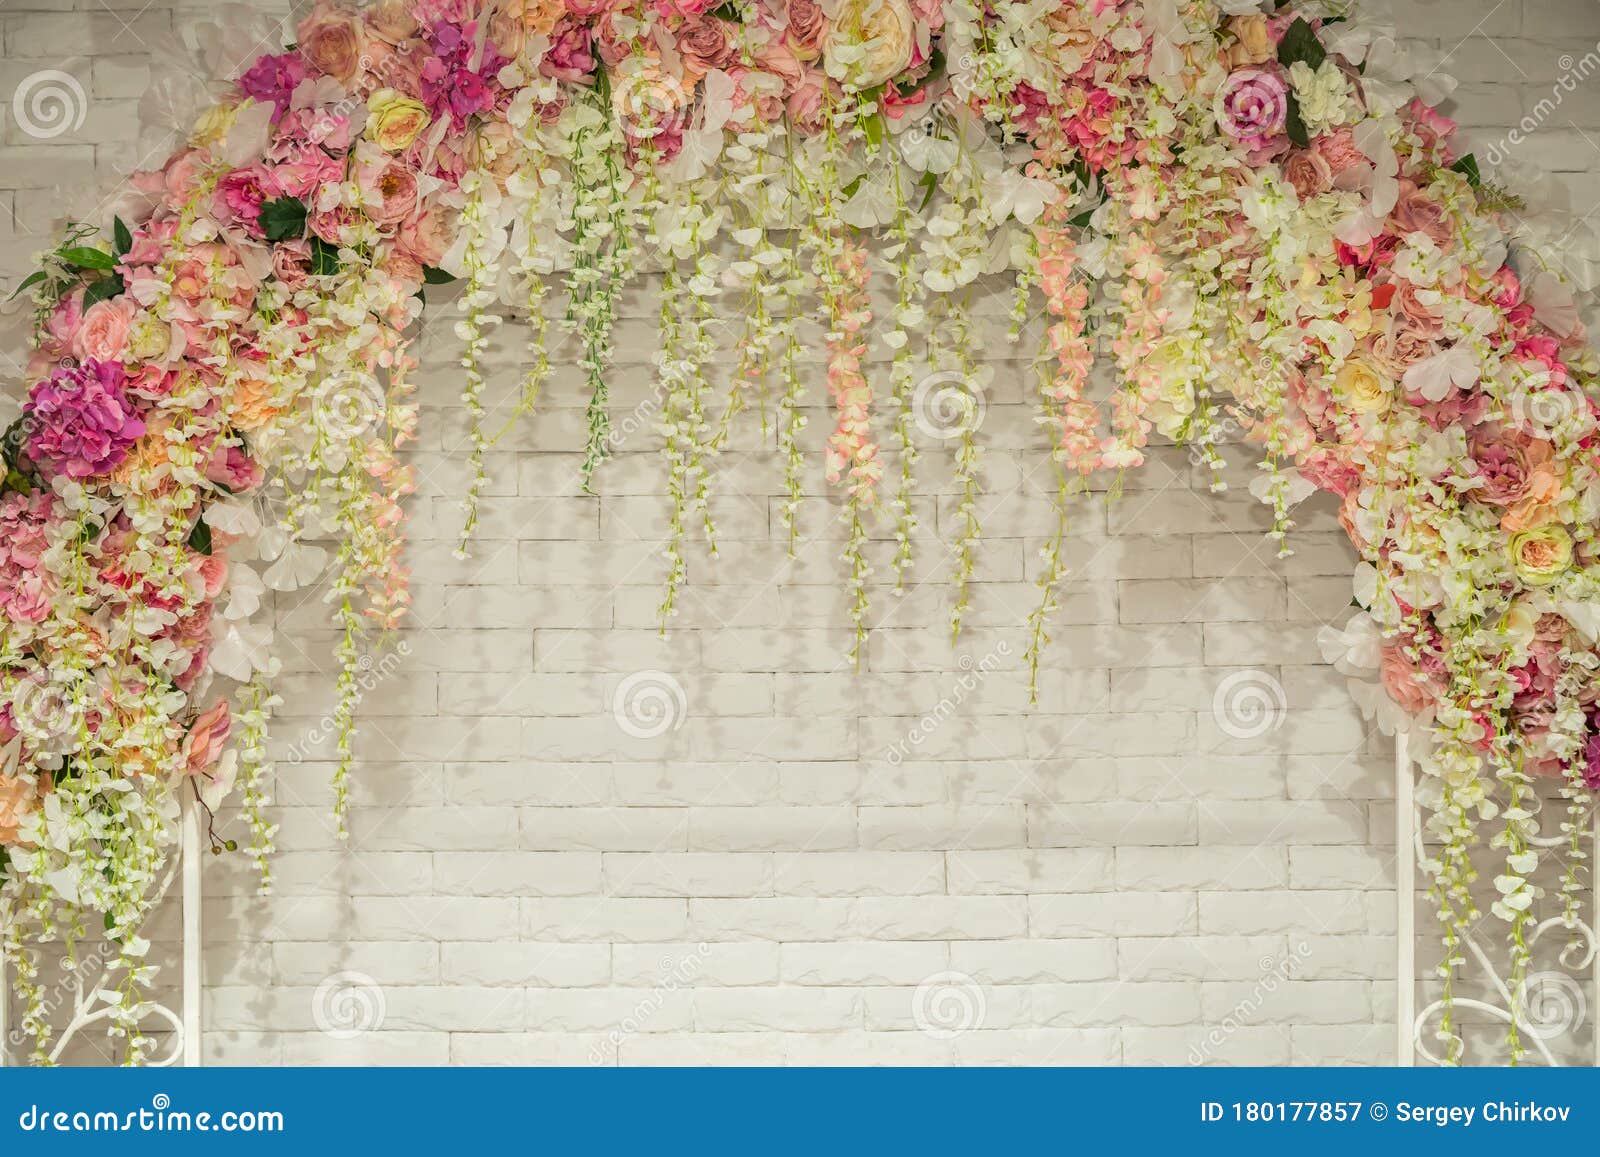 Wedding Arch with Flowers for the Wedding Ceremony Stock Image - Image ...